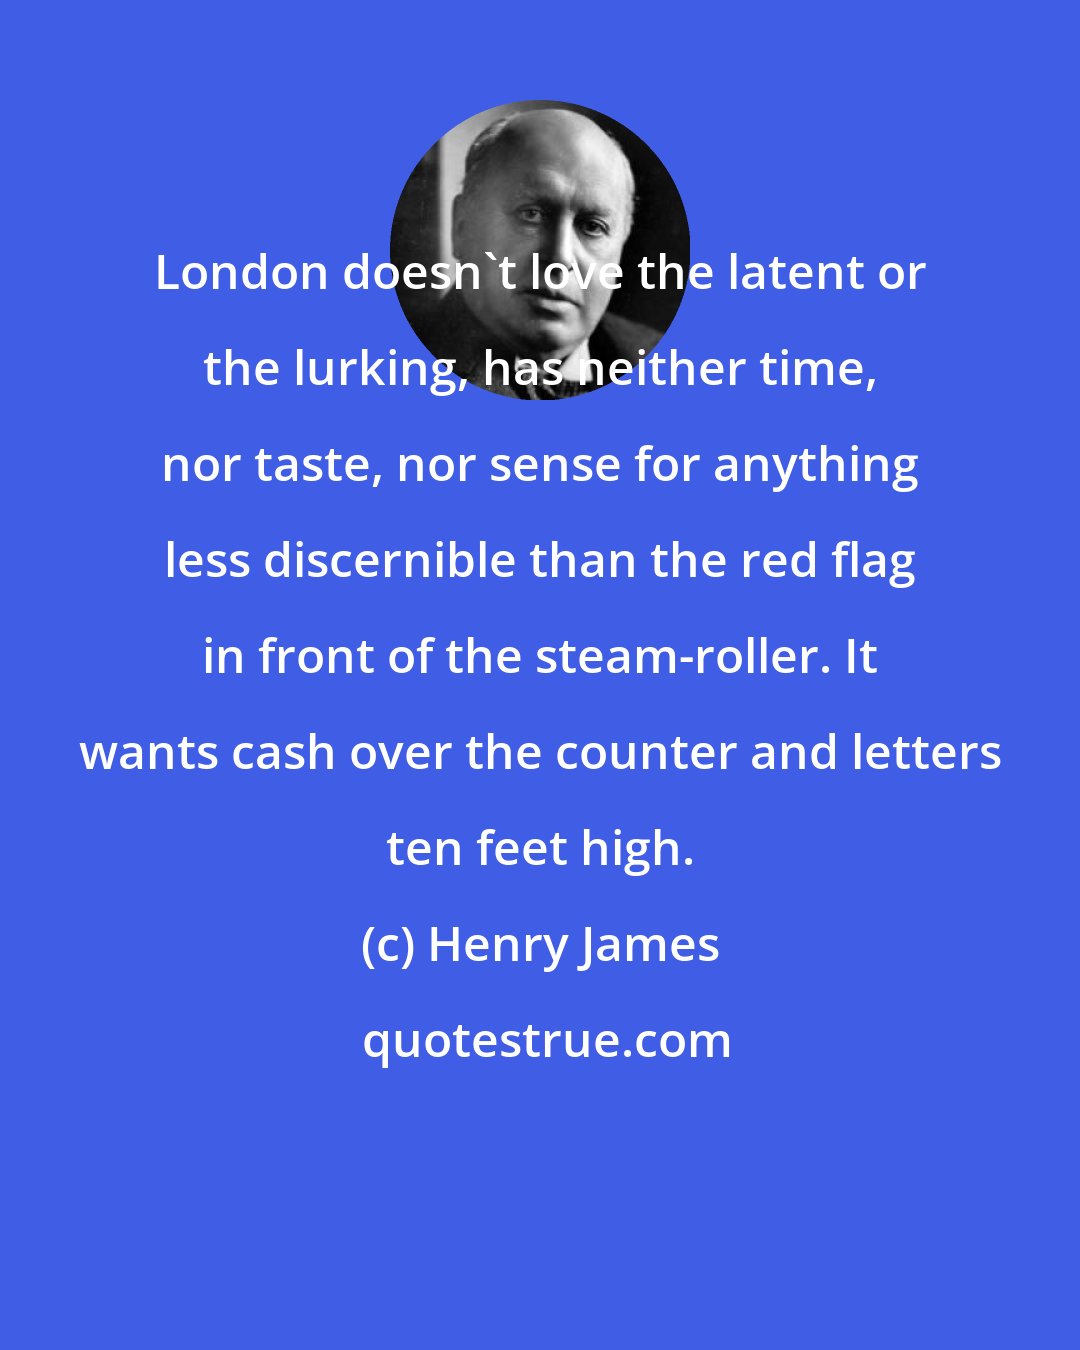 Henry James: London doesn't love the latent or the lurking, has neither time, nor taste, nor sense for anything less discernible than the red flag in front of the steam-roller. It wants cash over the counter and letters ten feet high.